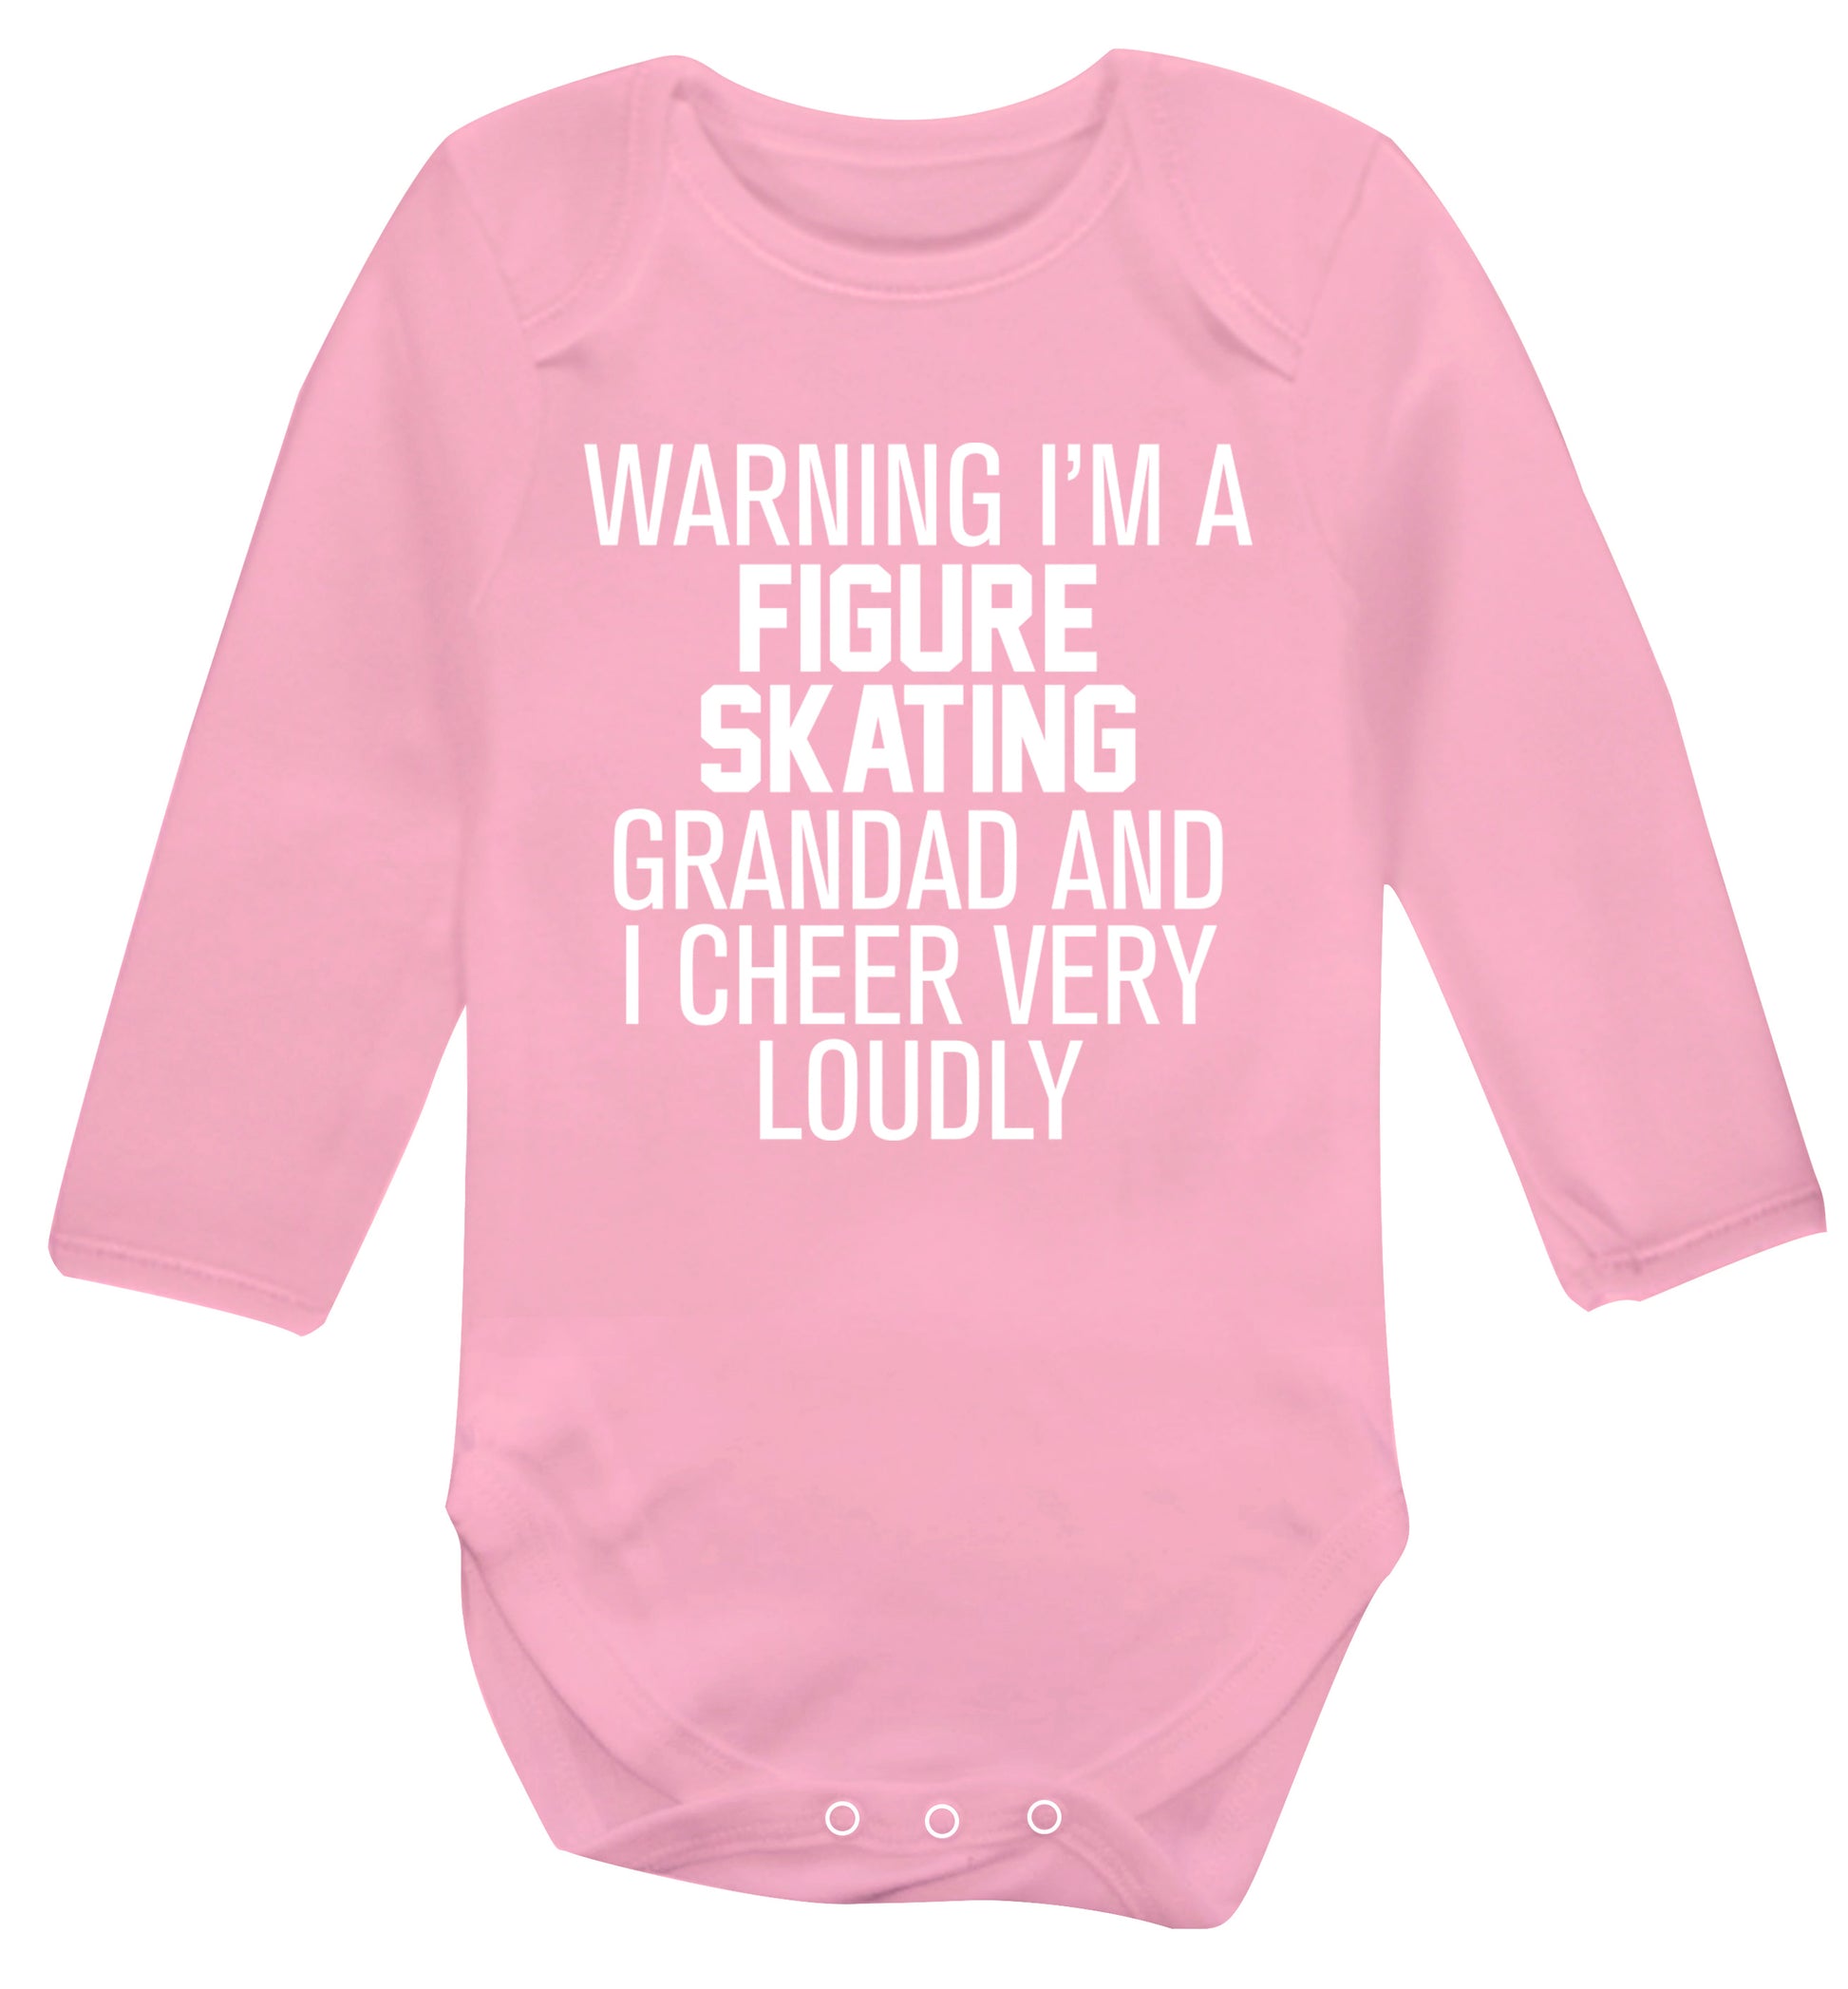 Warning I'm a figure skating grandad and I cheer very loudly Baby Vest long sleeved pale pink 6-12 months